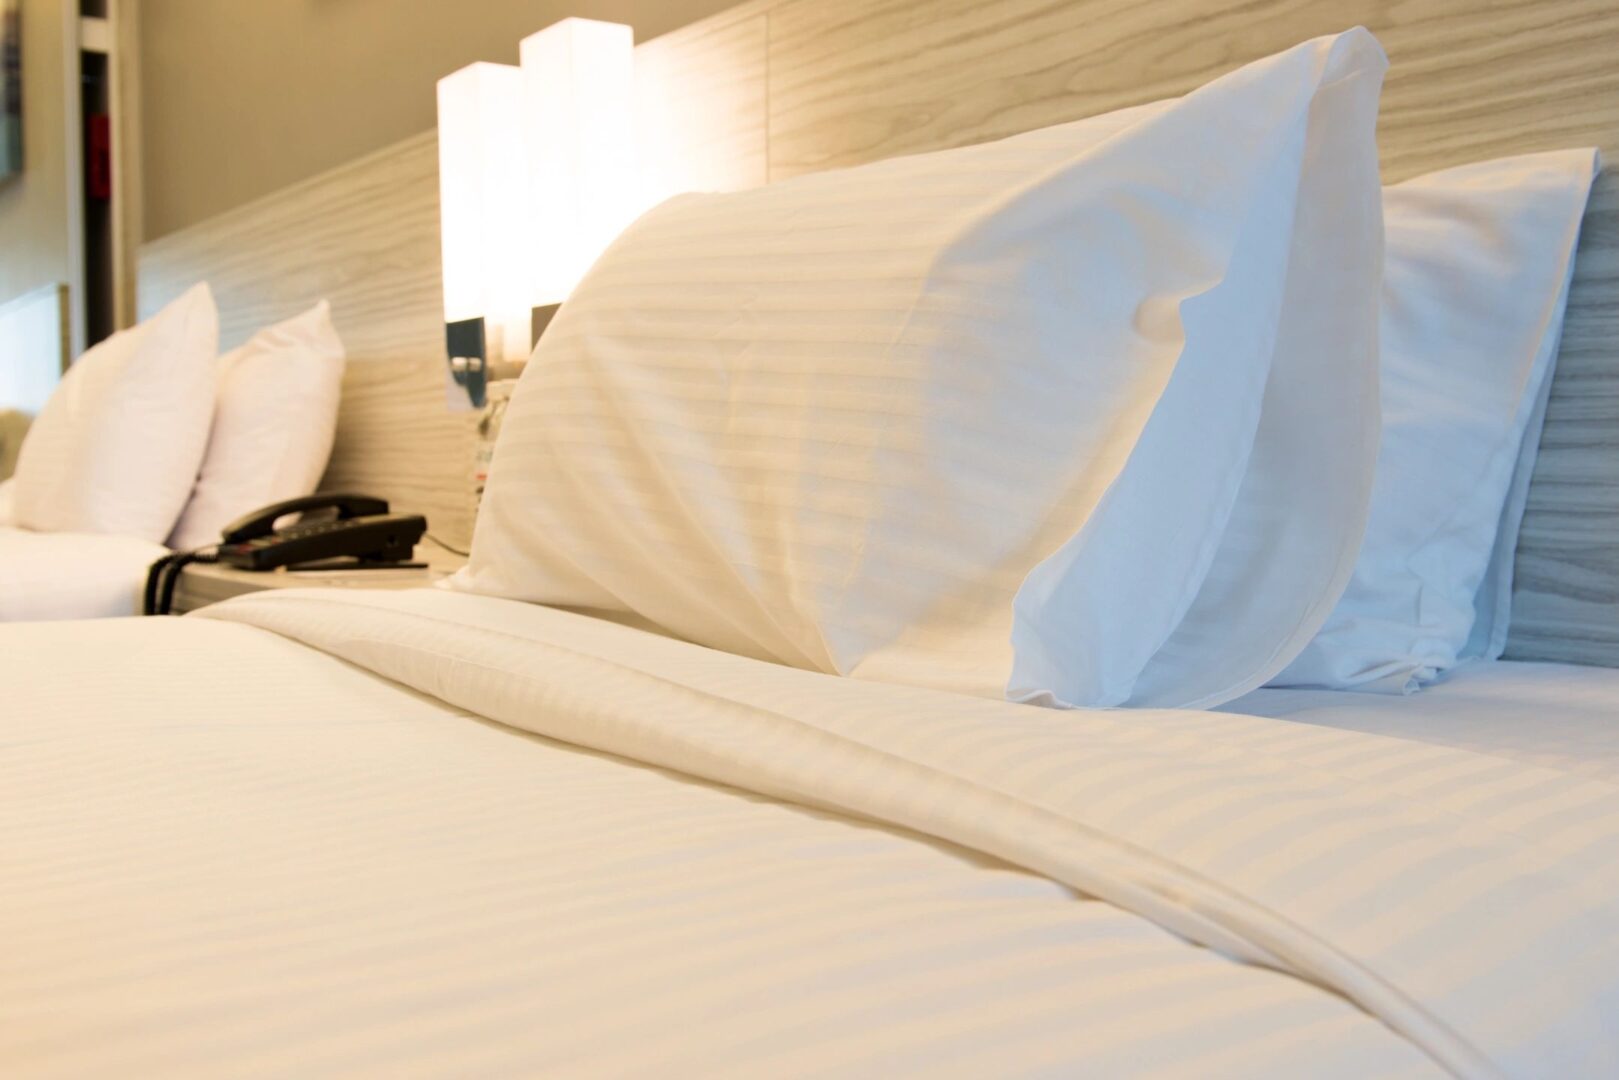 A bed with white sheets and pillows on it and lights